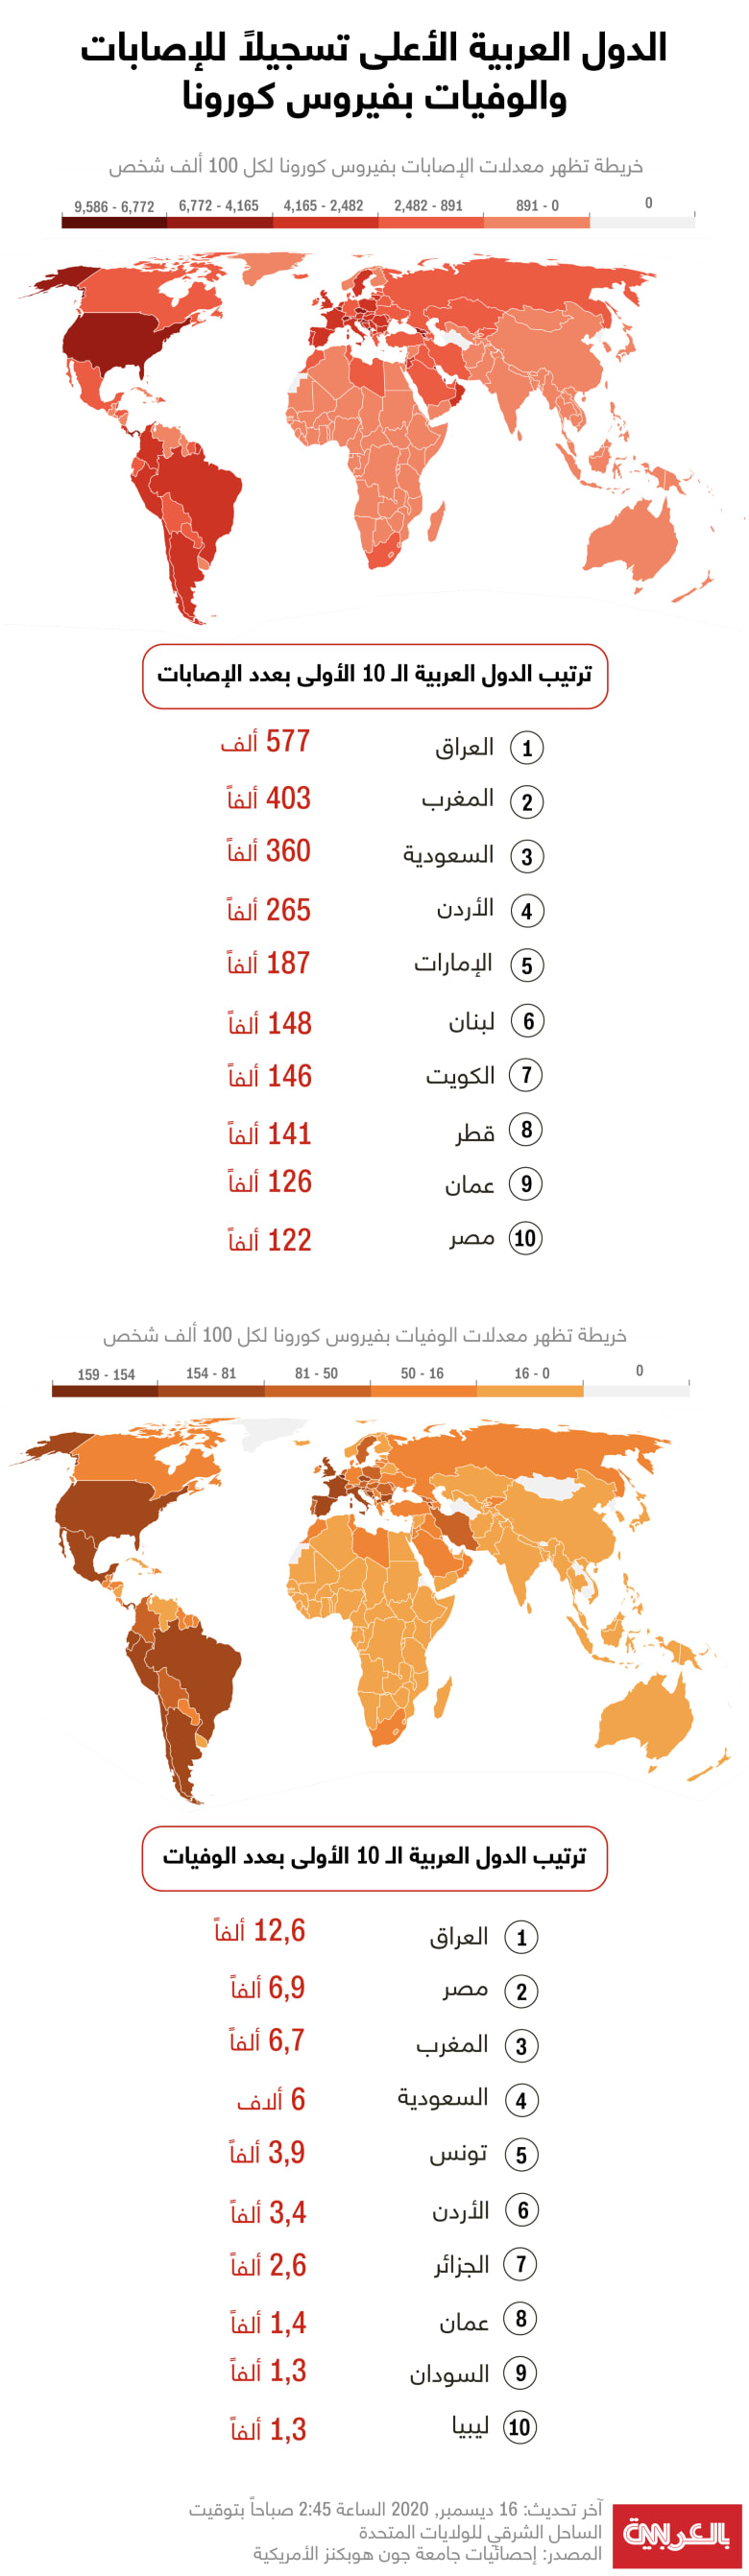 arabic-countries-infections-deaths-16-dec